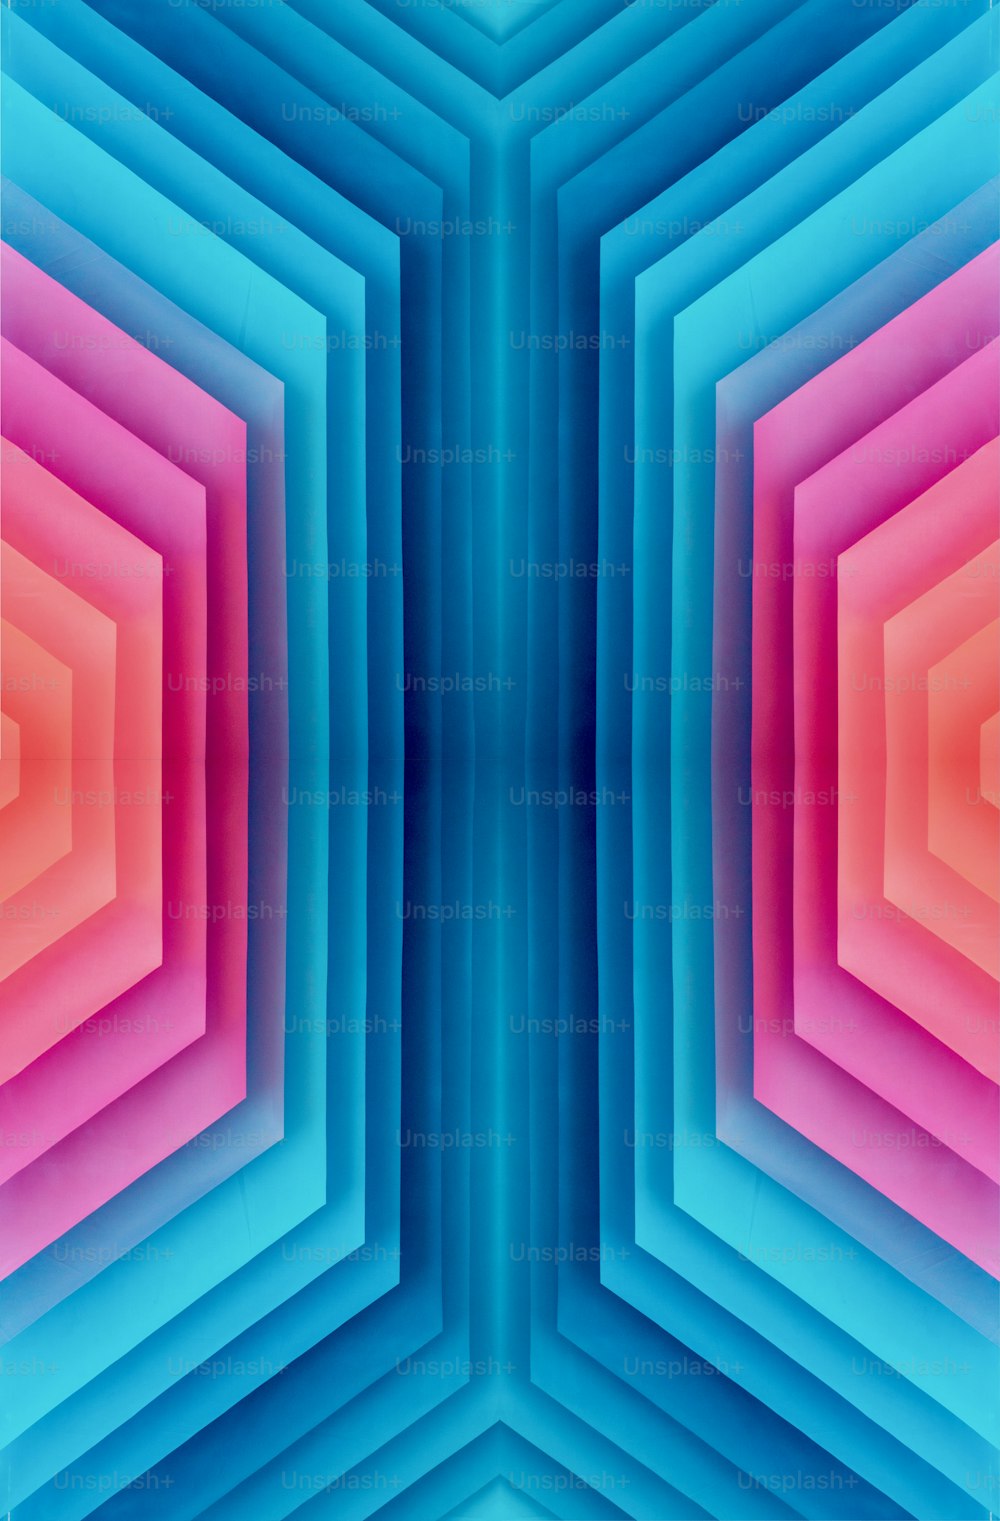 an abstract image of a blue and pink hexagonal structure